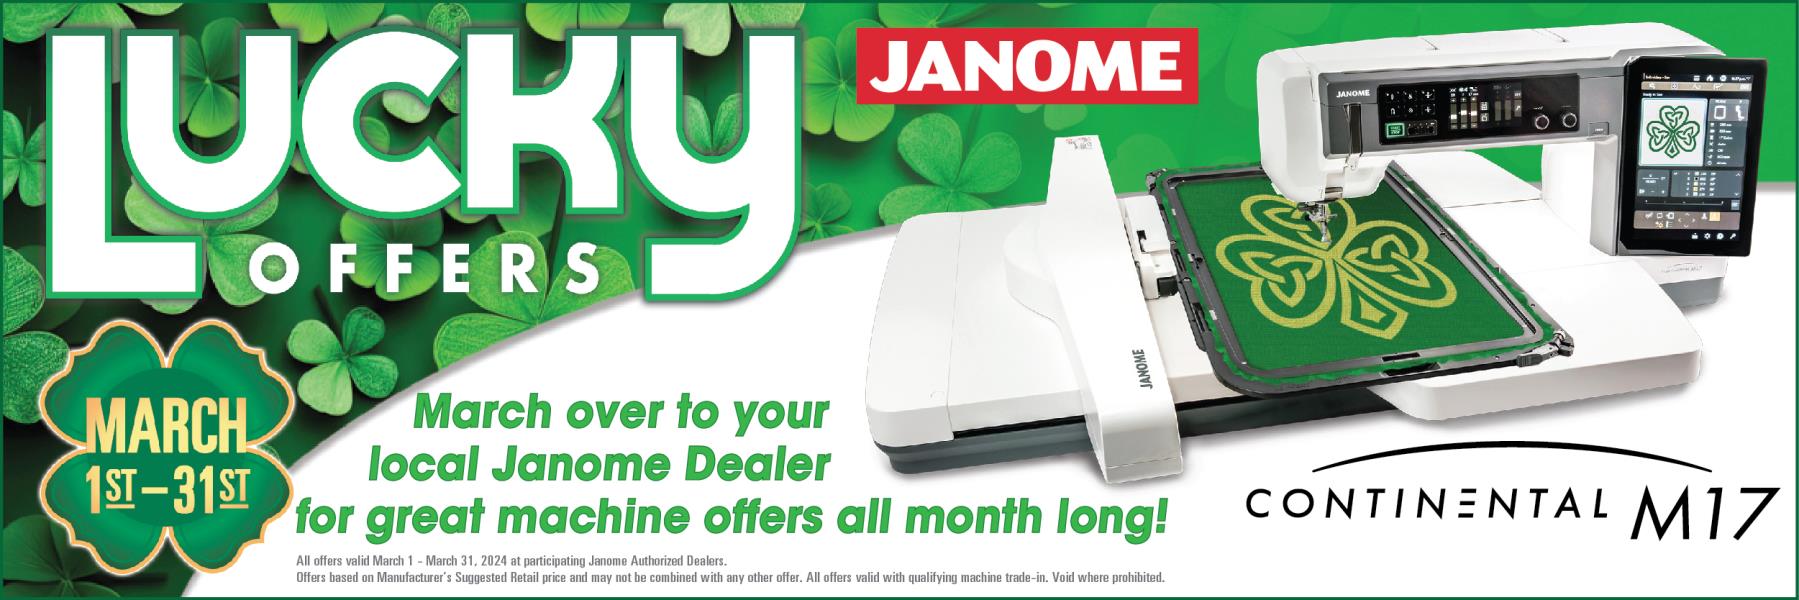 Visit Janome.com to learn more about their Lucky Offer sales event and view the full flyer!